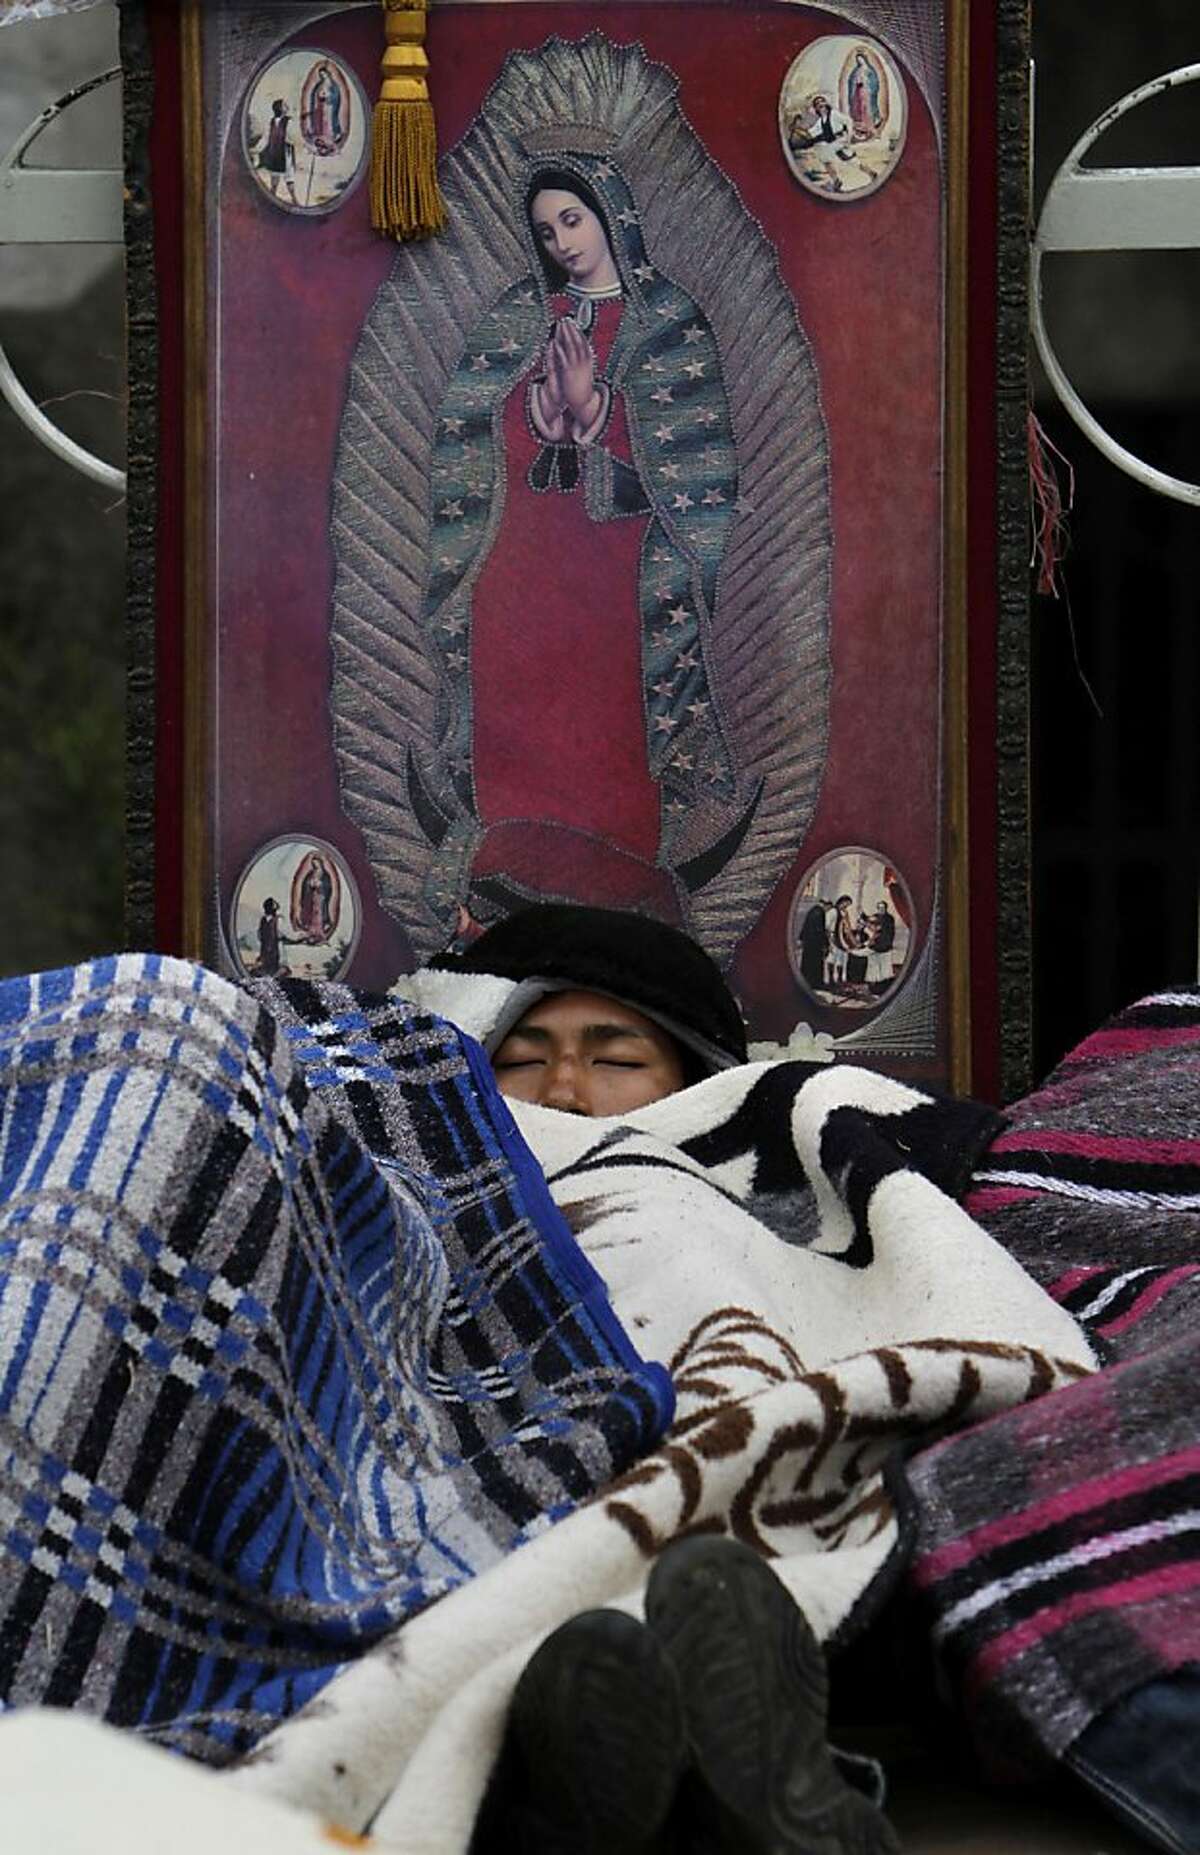 A pilgrim sleeps by an image of the Virgin of Guadalupe outside the Basilica of the Virgin of Guadalupe in Mexico City, Sunday Dec. 11, 2011. Hundreds of thousands of Mexicans are making the pilgrimage to the shrine in anticipation of the Catholic icon's feast day on Dec. 12. Also known as La Morenita, Our Lady of Guadalupe is Mexico's most popular religious and cultural image. (AP Photo/Marco Ugarte)